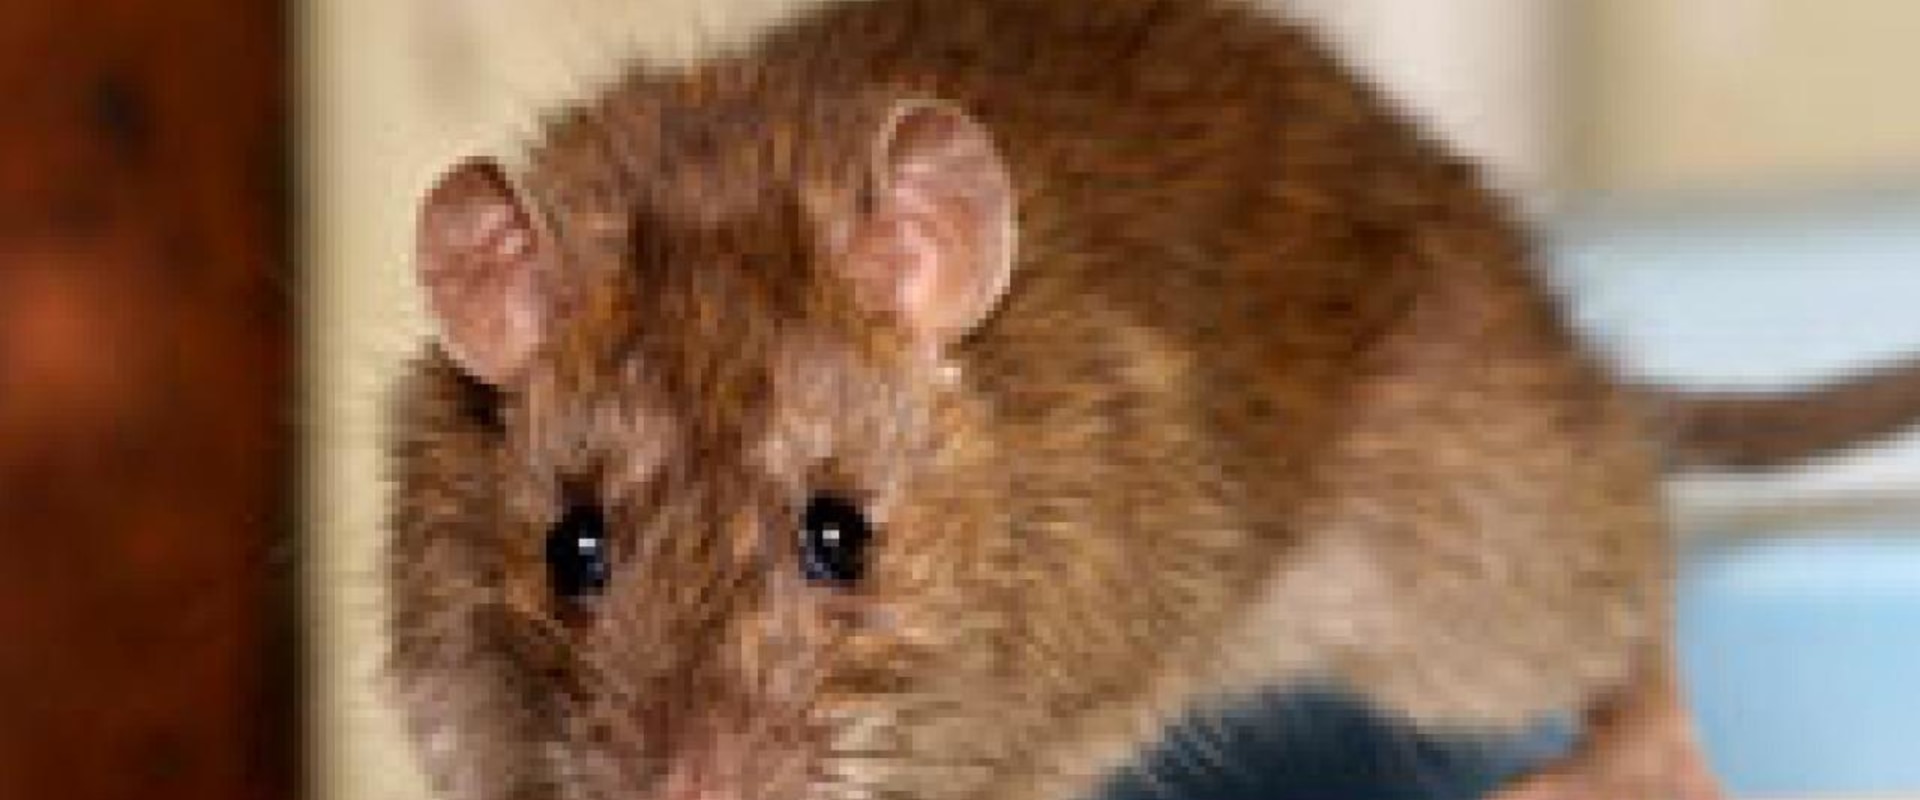 How do you tell if you have rodents in your walls?